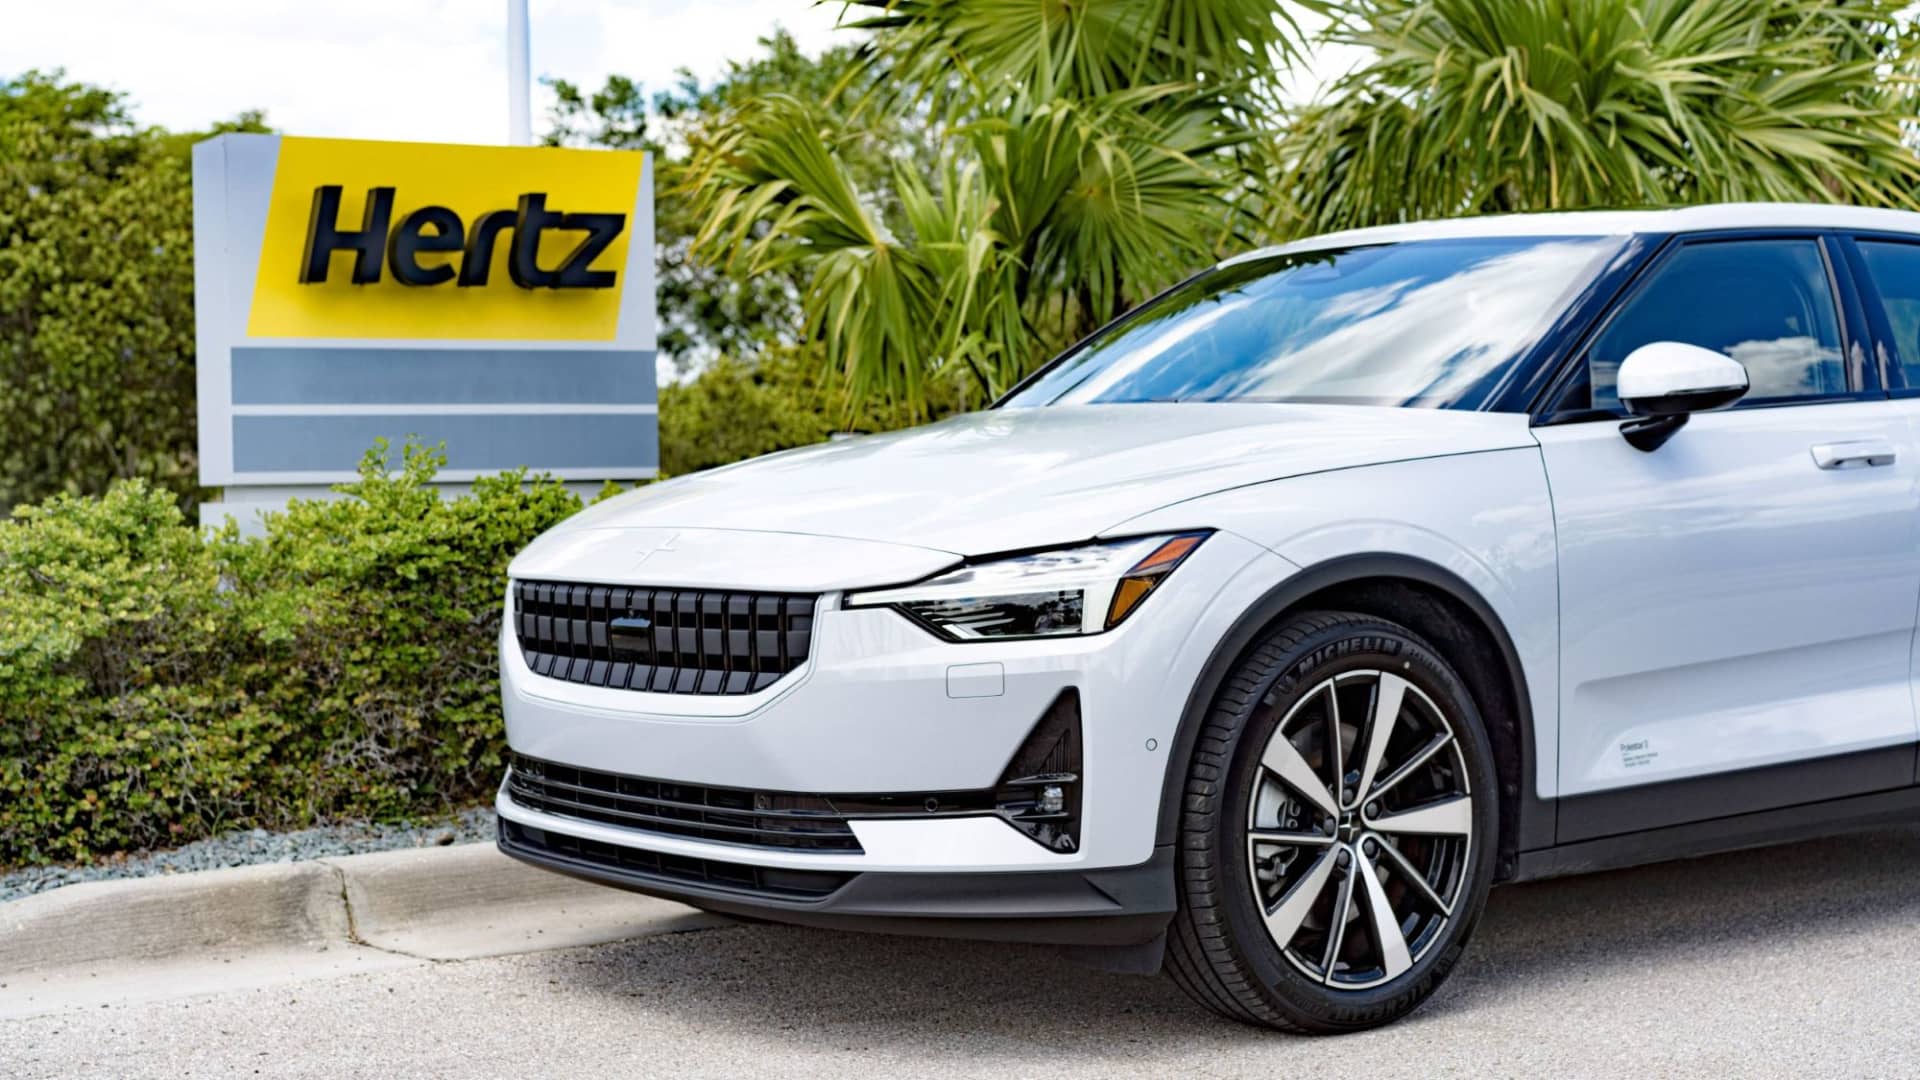 EV start-up Polestar signs deal to supply up to 65,000 vehicles to Hertz